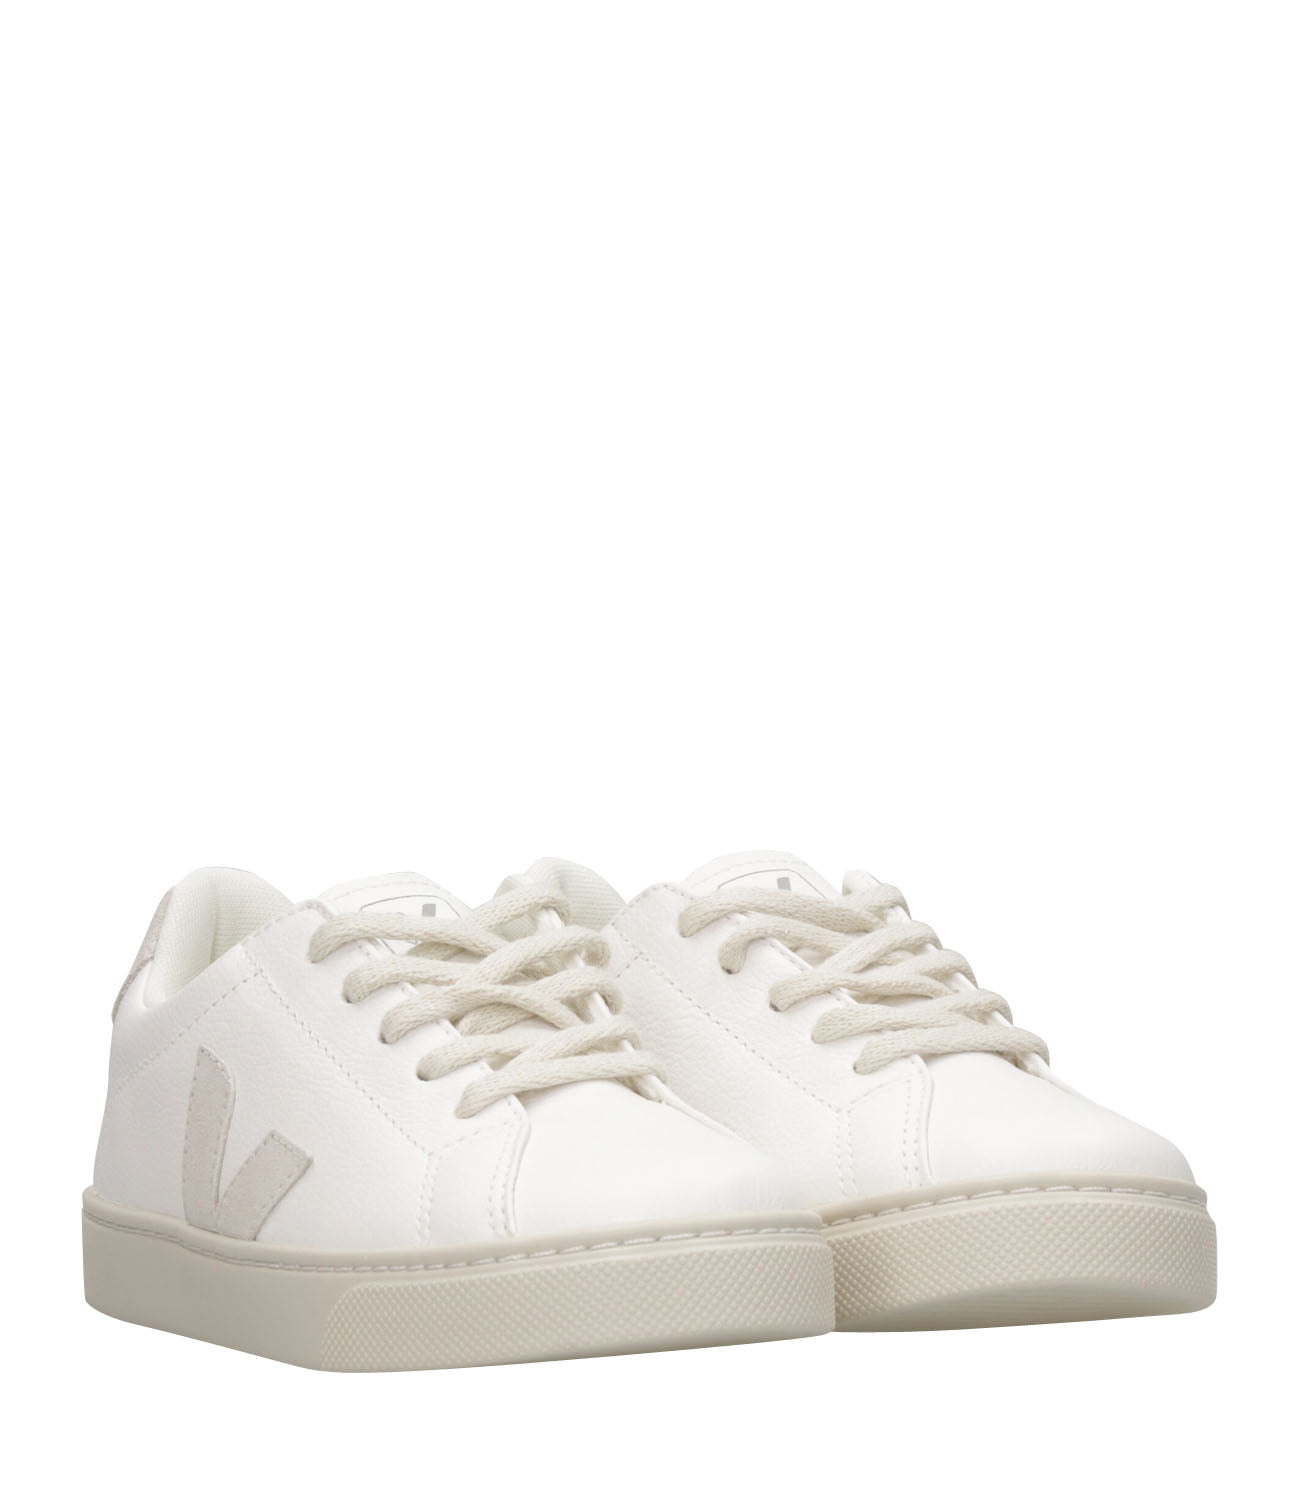 Veja Kids | Esplar Laces Sneakers White and Natural